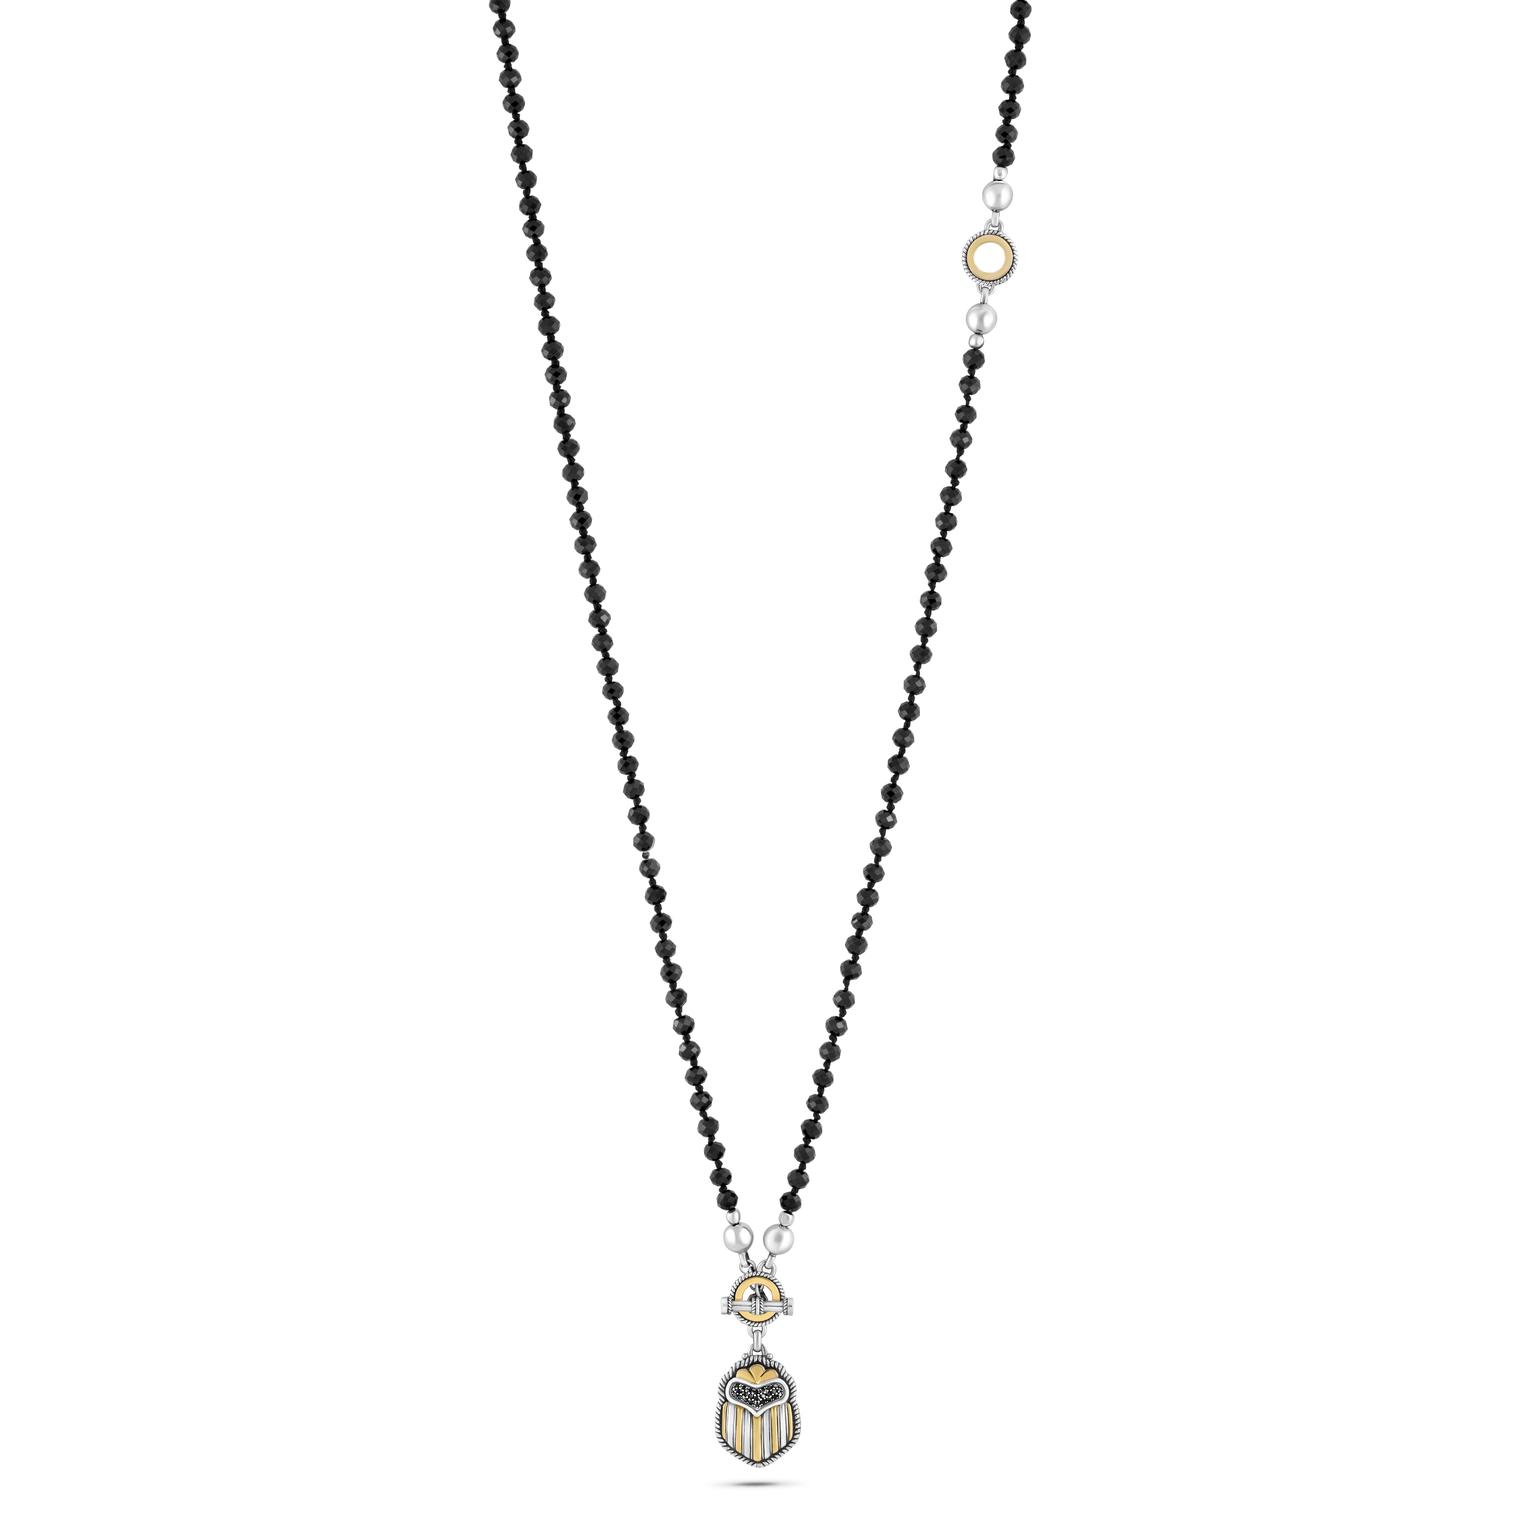 18kt Gold and sterling silver beaded multi-way scarab necklace adorned with semi-precious and precious stones 